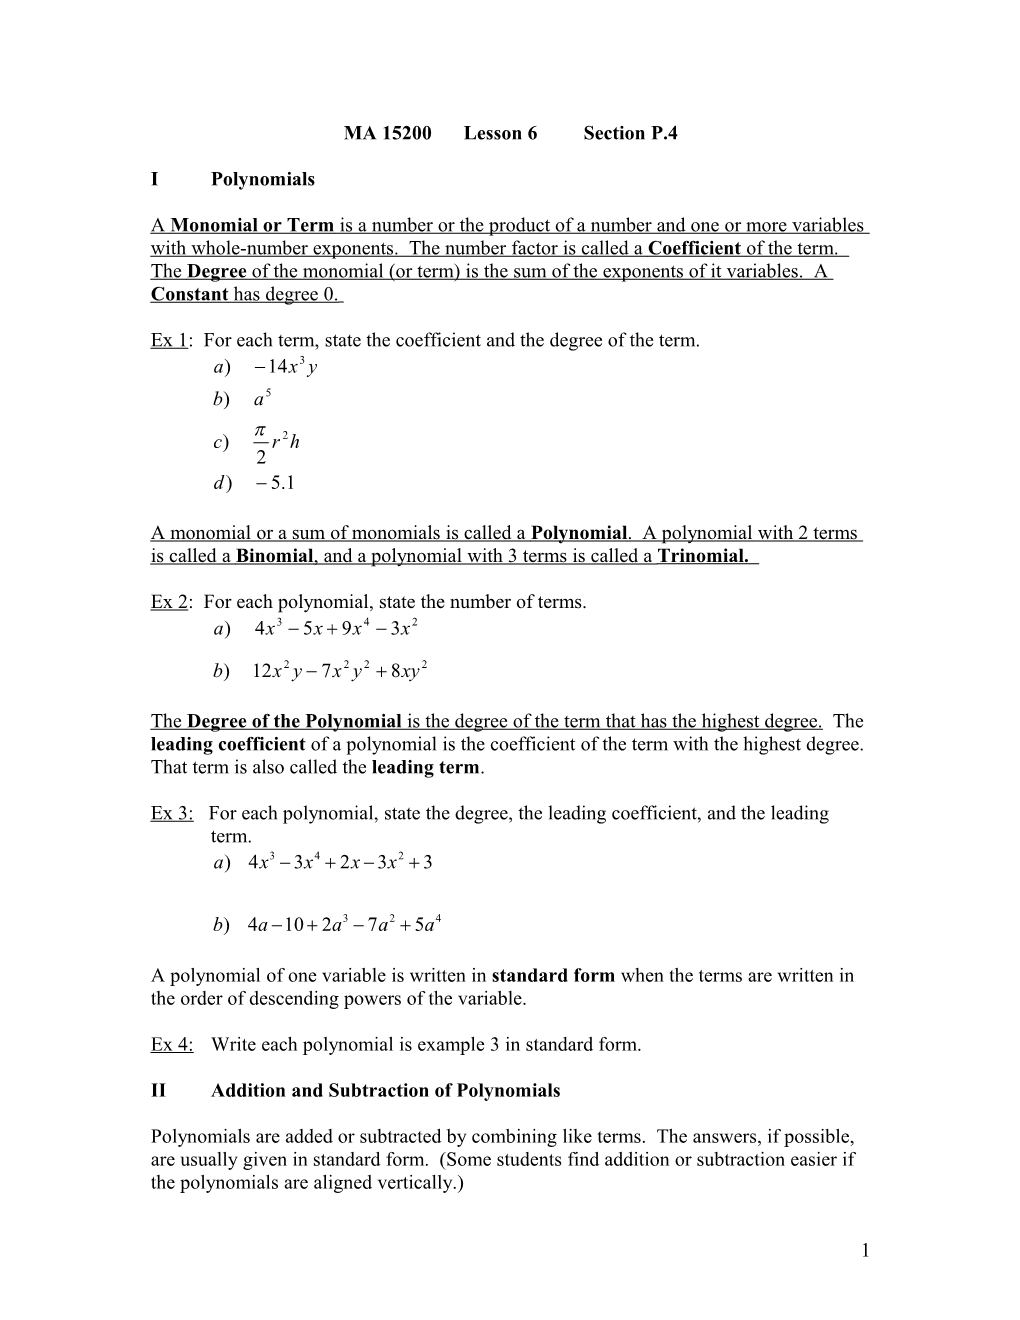 MA 15200 Lesson 6 Section P.4